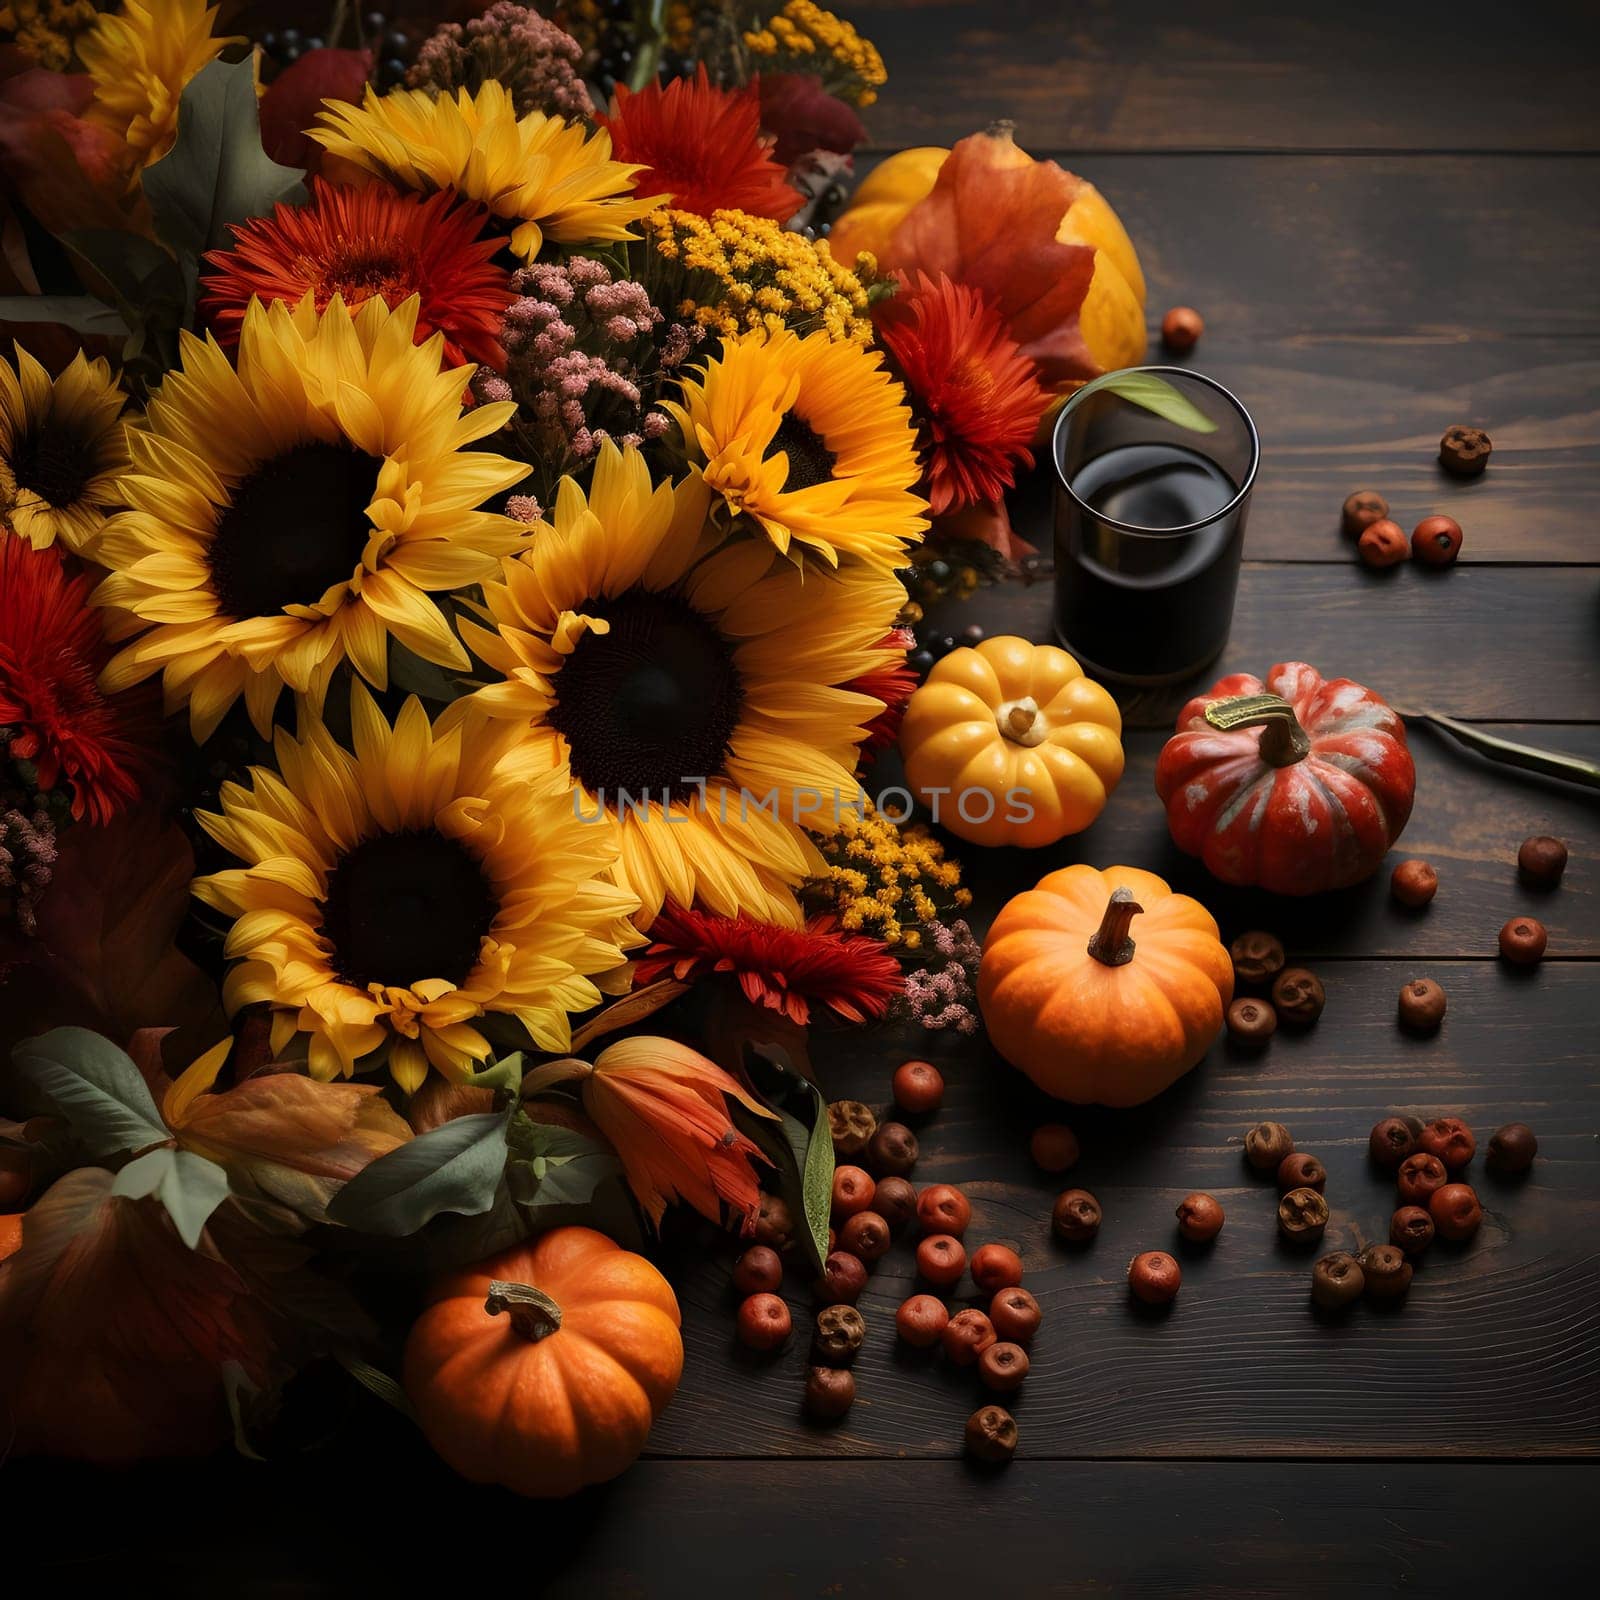 Sunflowers, pumpkins, rowan, vegetables. Harvest from the field on a dark board wooden background. Pumpkin as a dish of thanksgiving for the harvest. An atmosphere of joy and celebration.